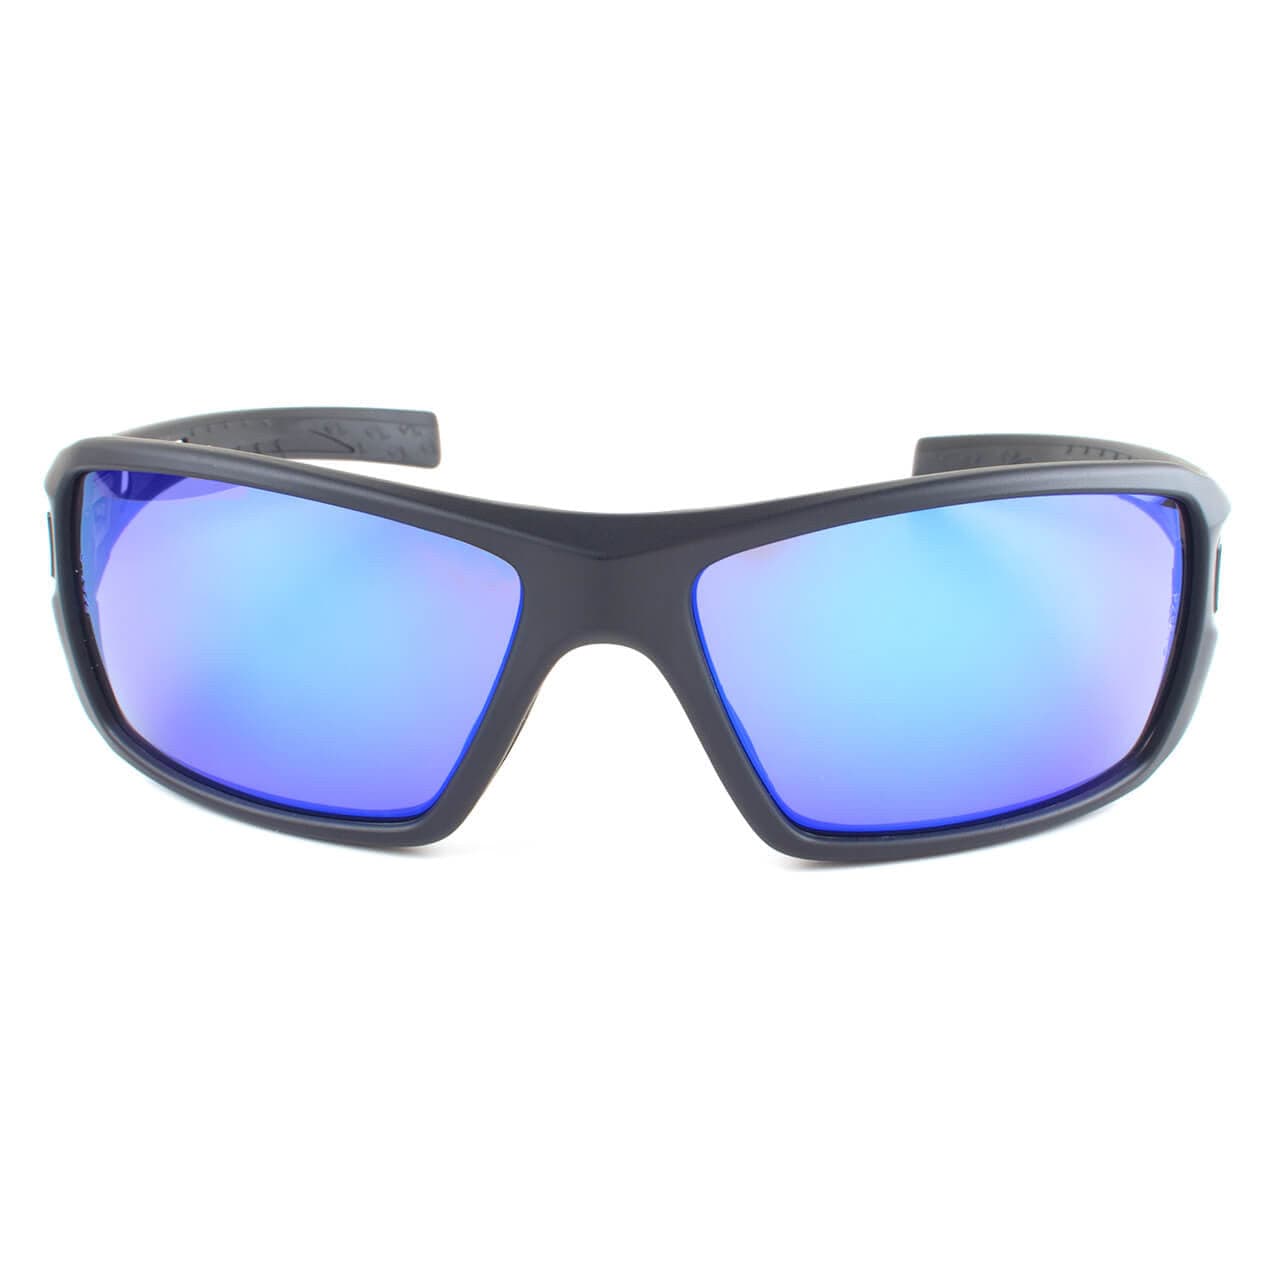 Metel M30 Safety Glasses with Black Frame and Blue Mirror Lenses Front View